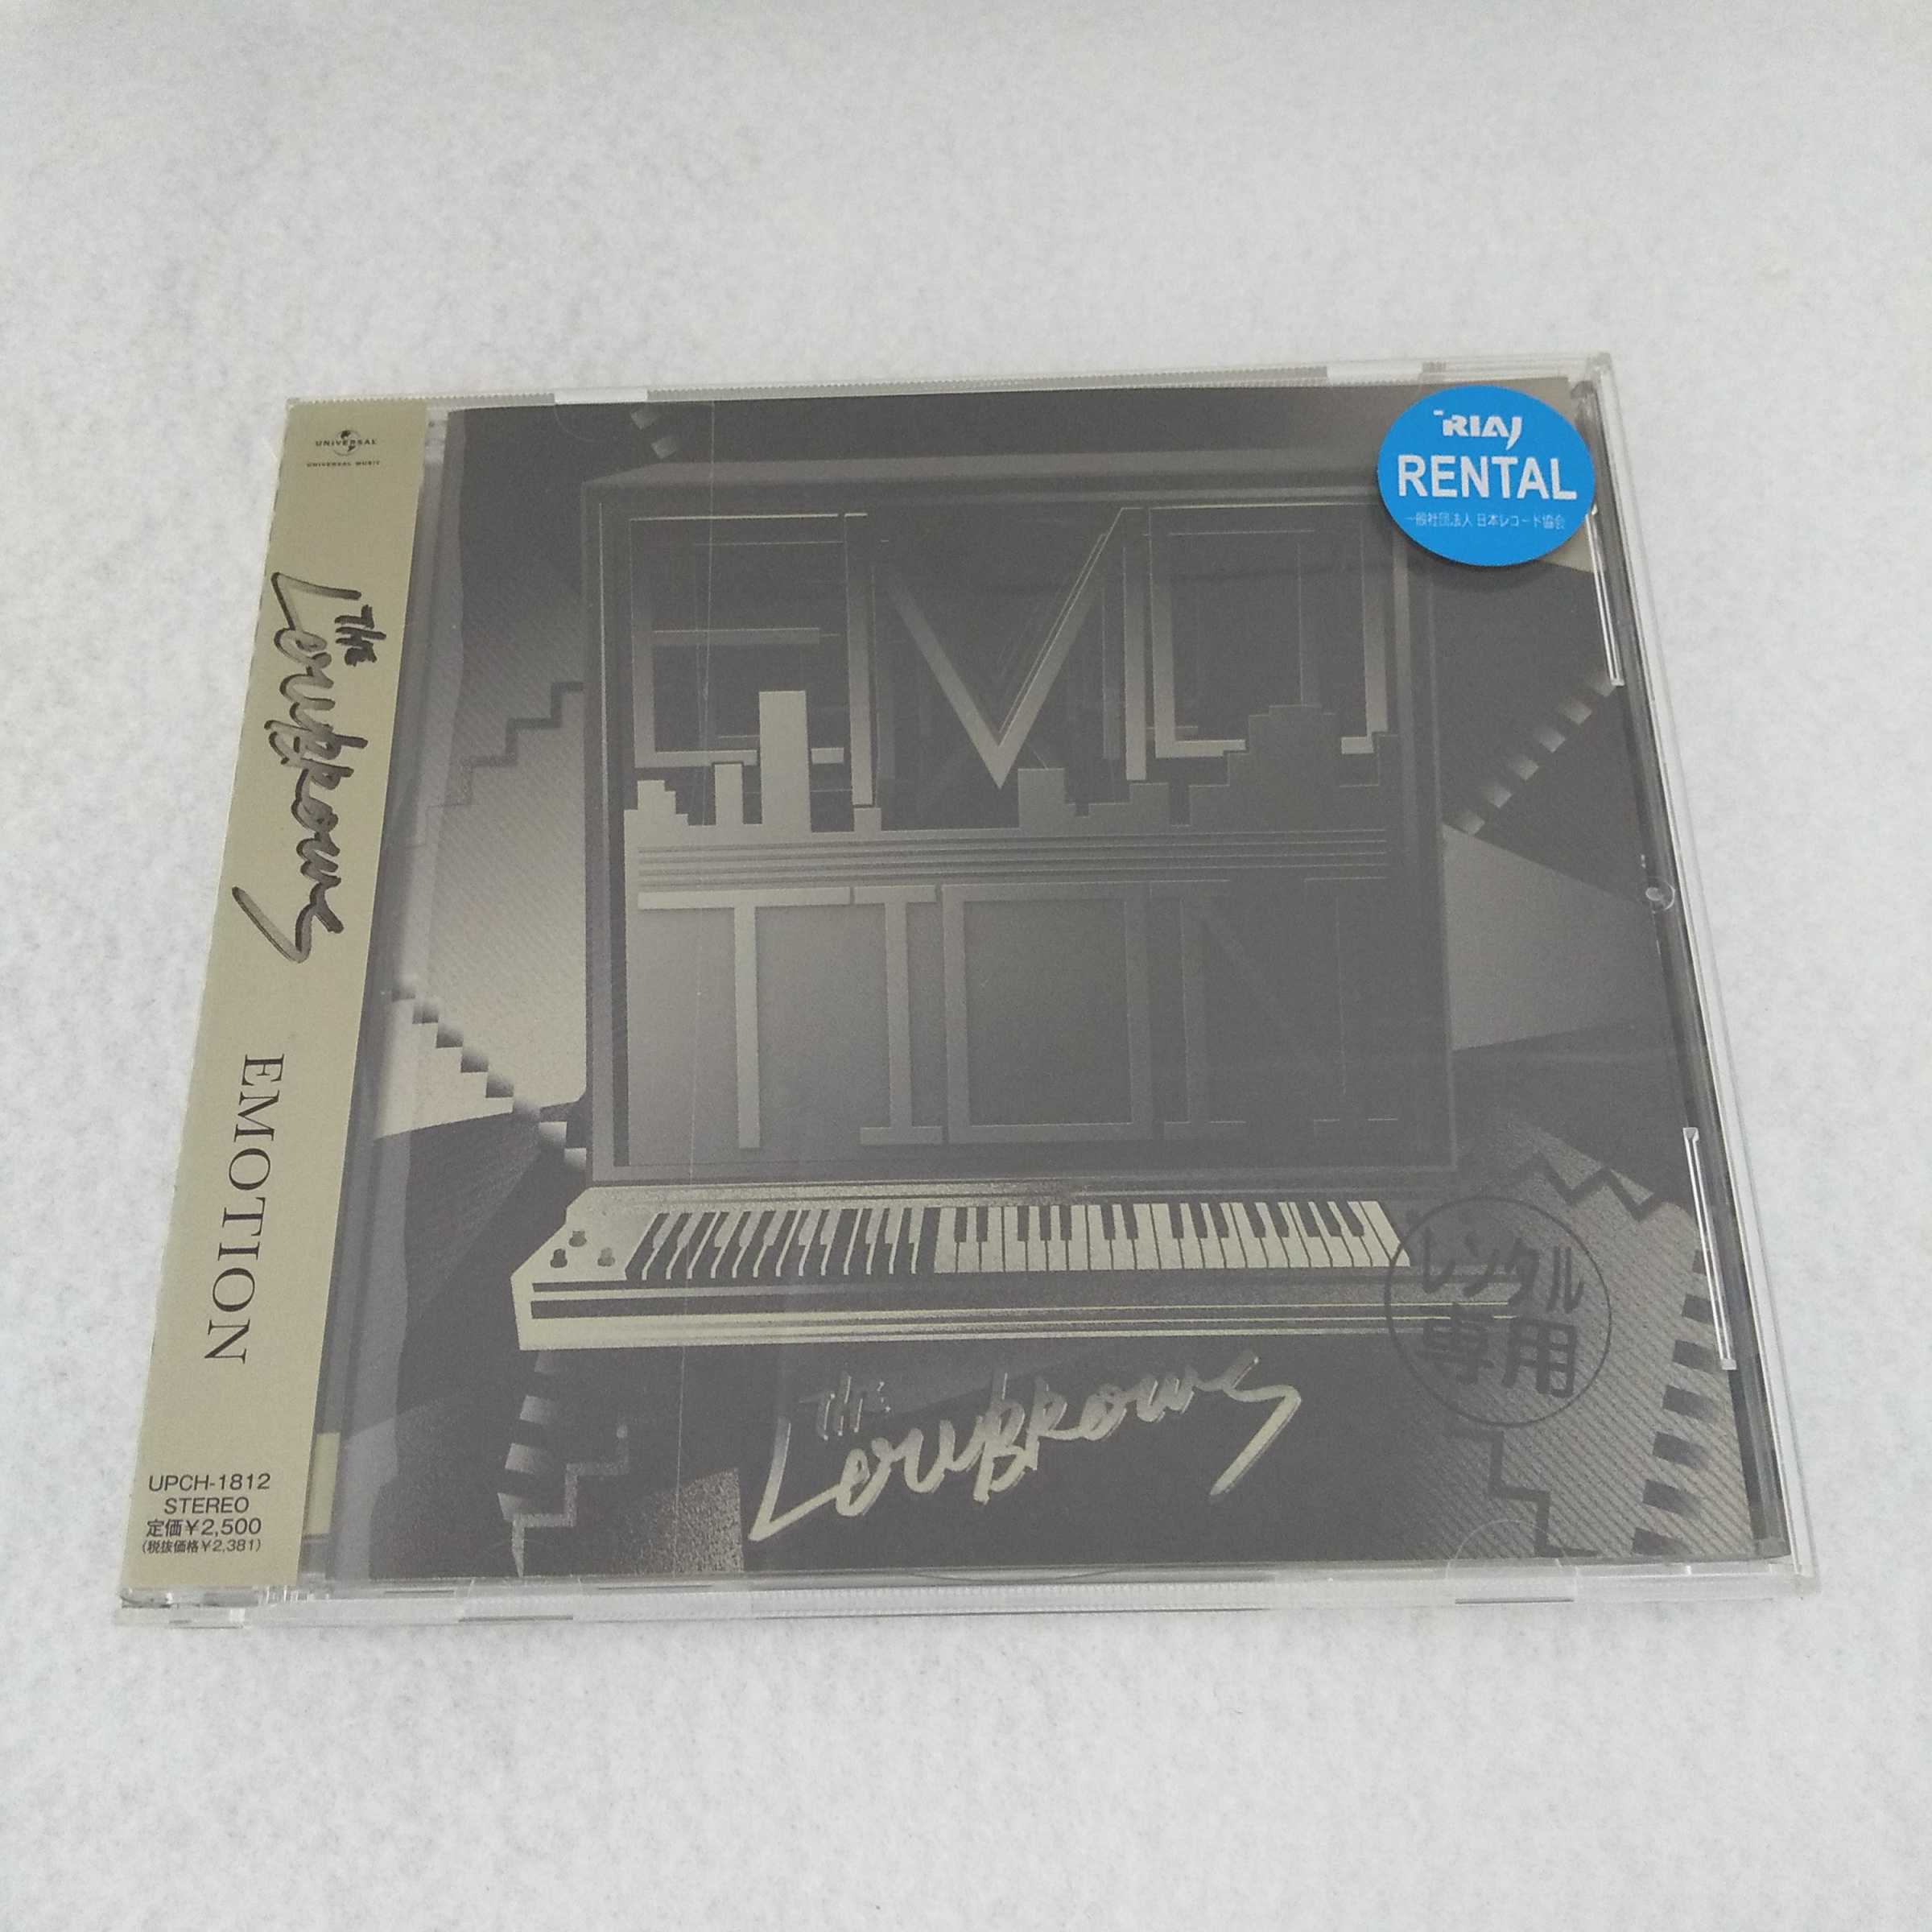 AC12969 【中古】 【CD】 EMOTION/THE LOWBROWS